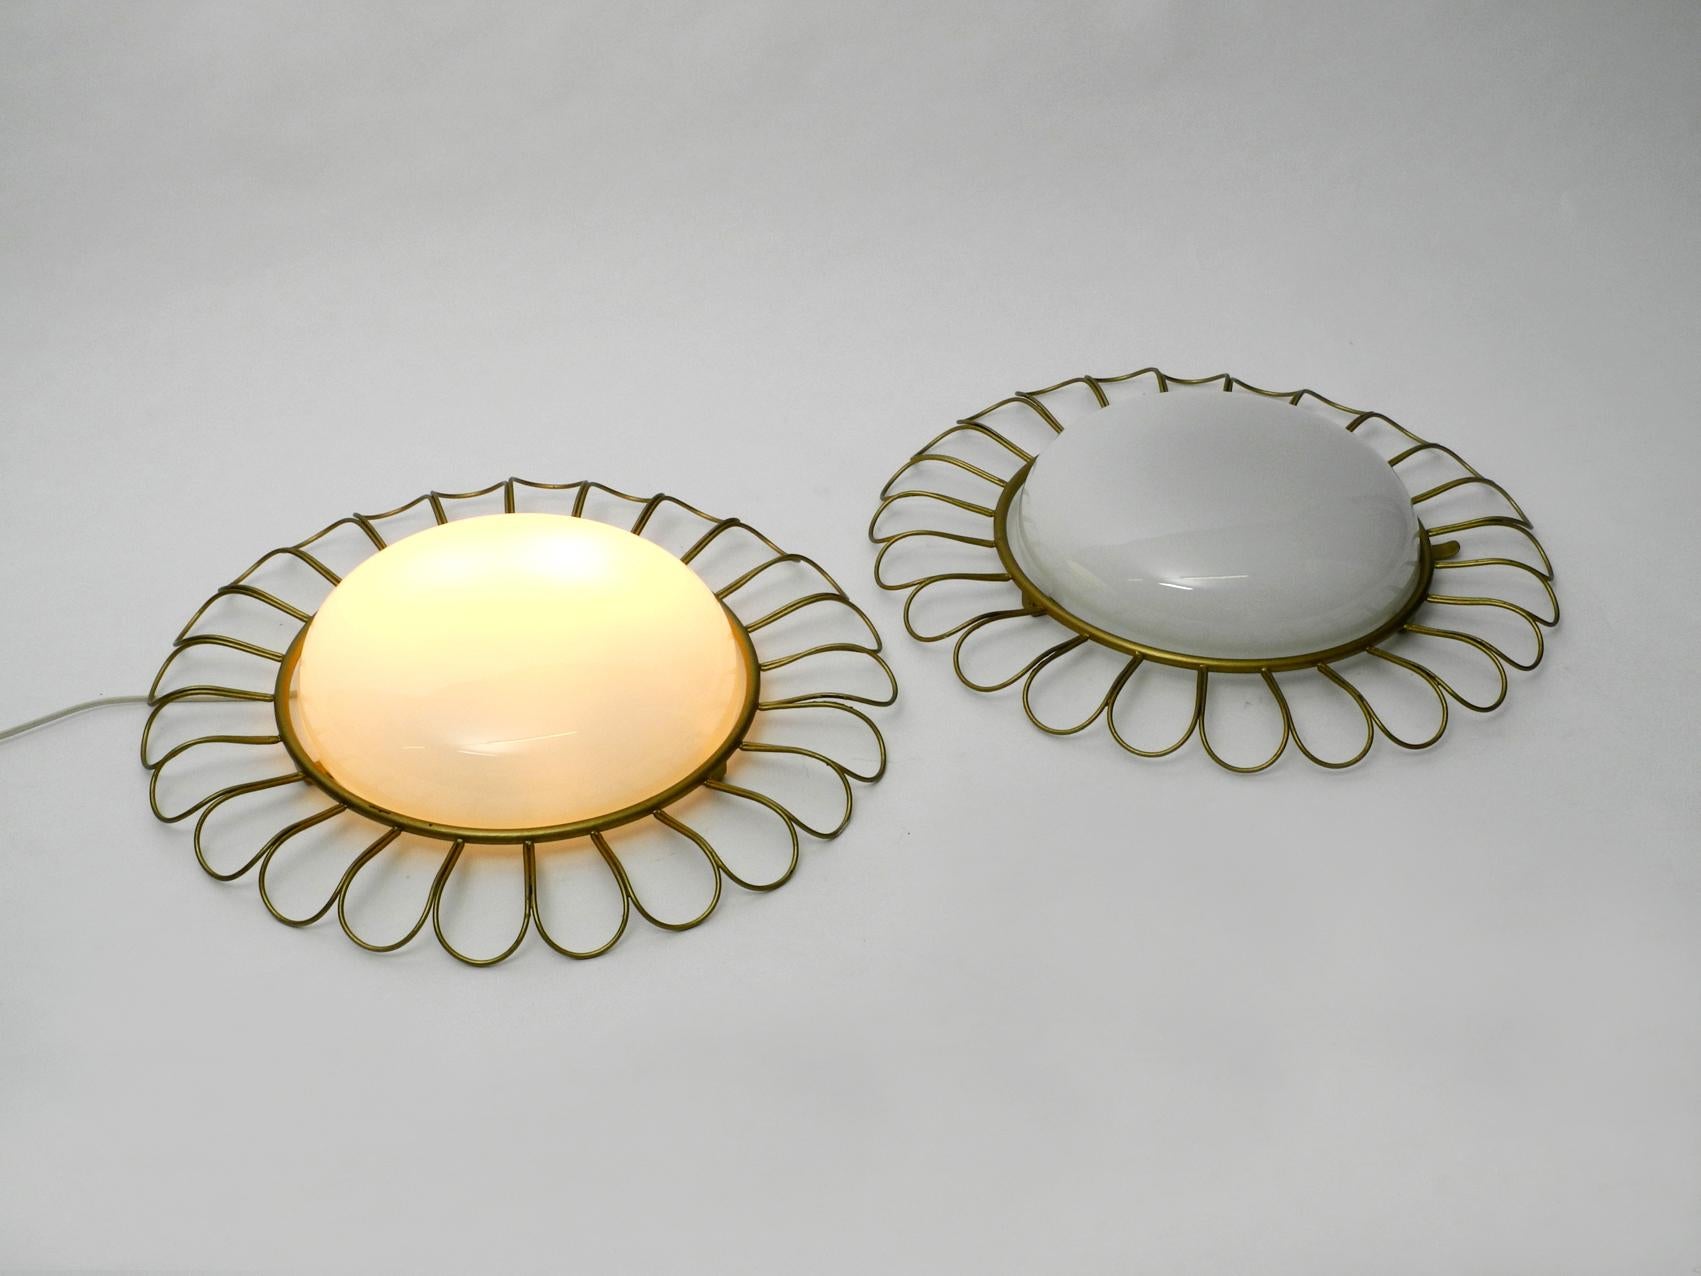 German Pair of Rare Large Midcentury Sunburst Wall or Ceiling Lamps from Limburg